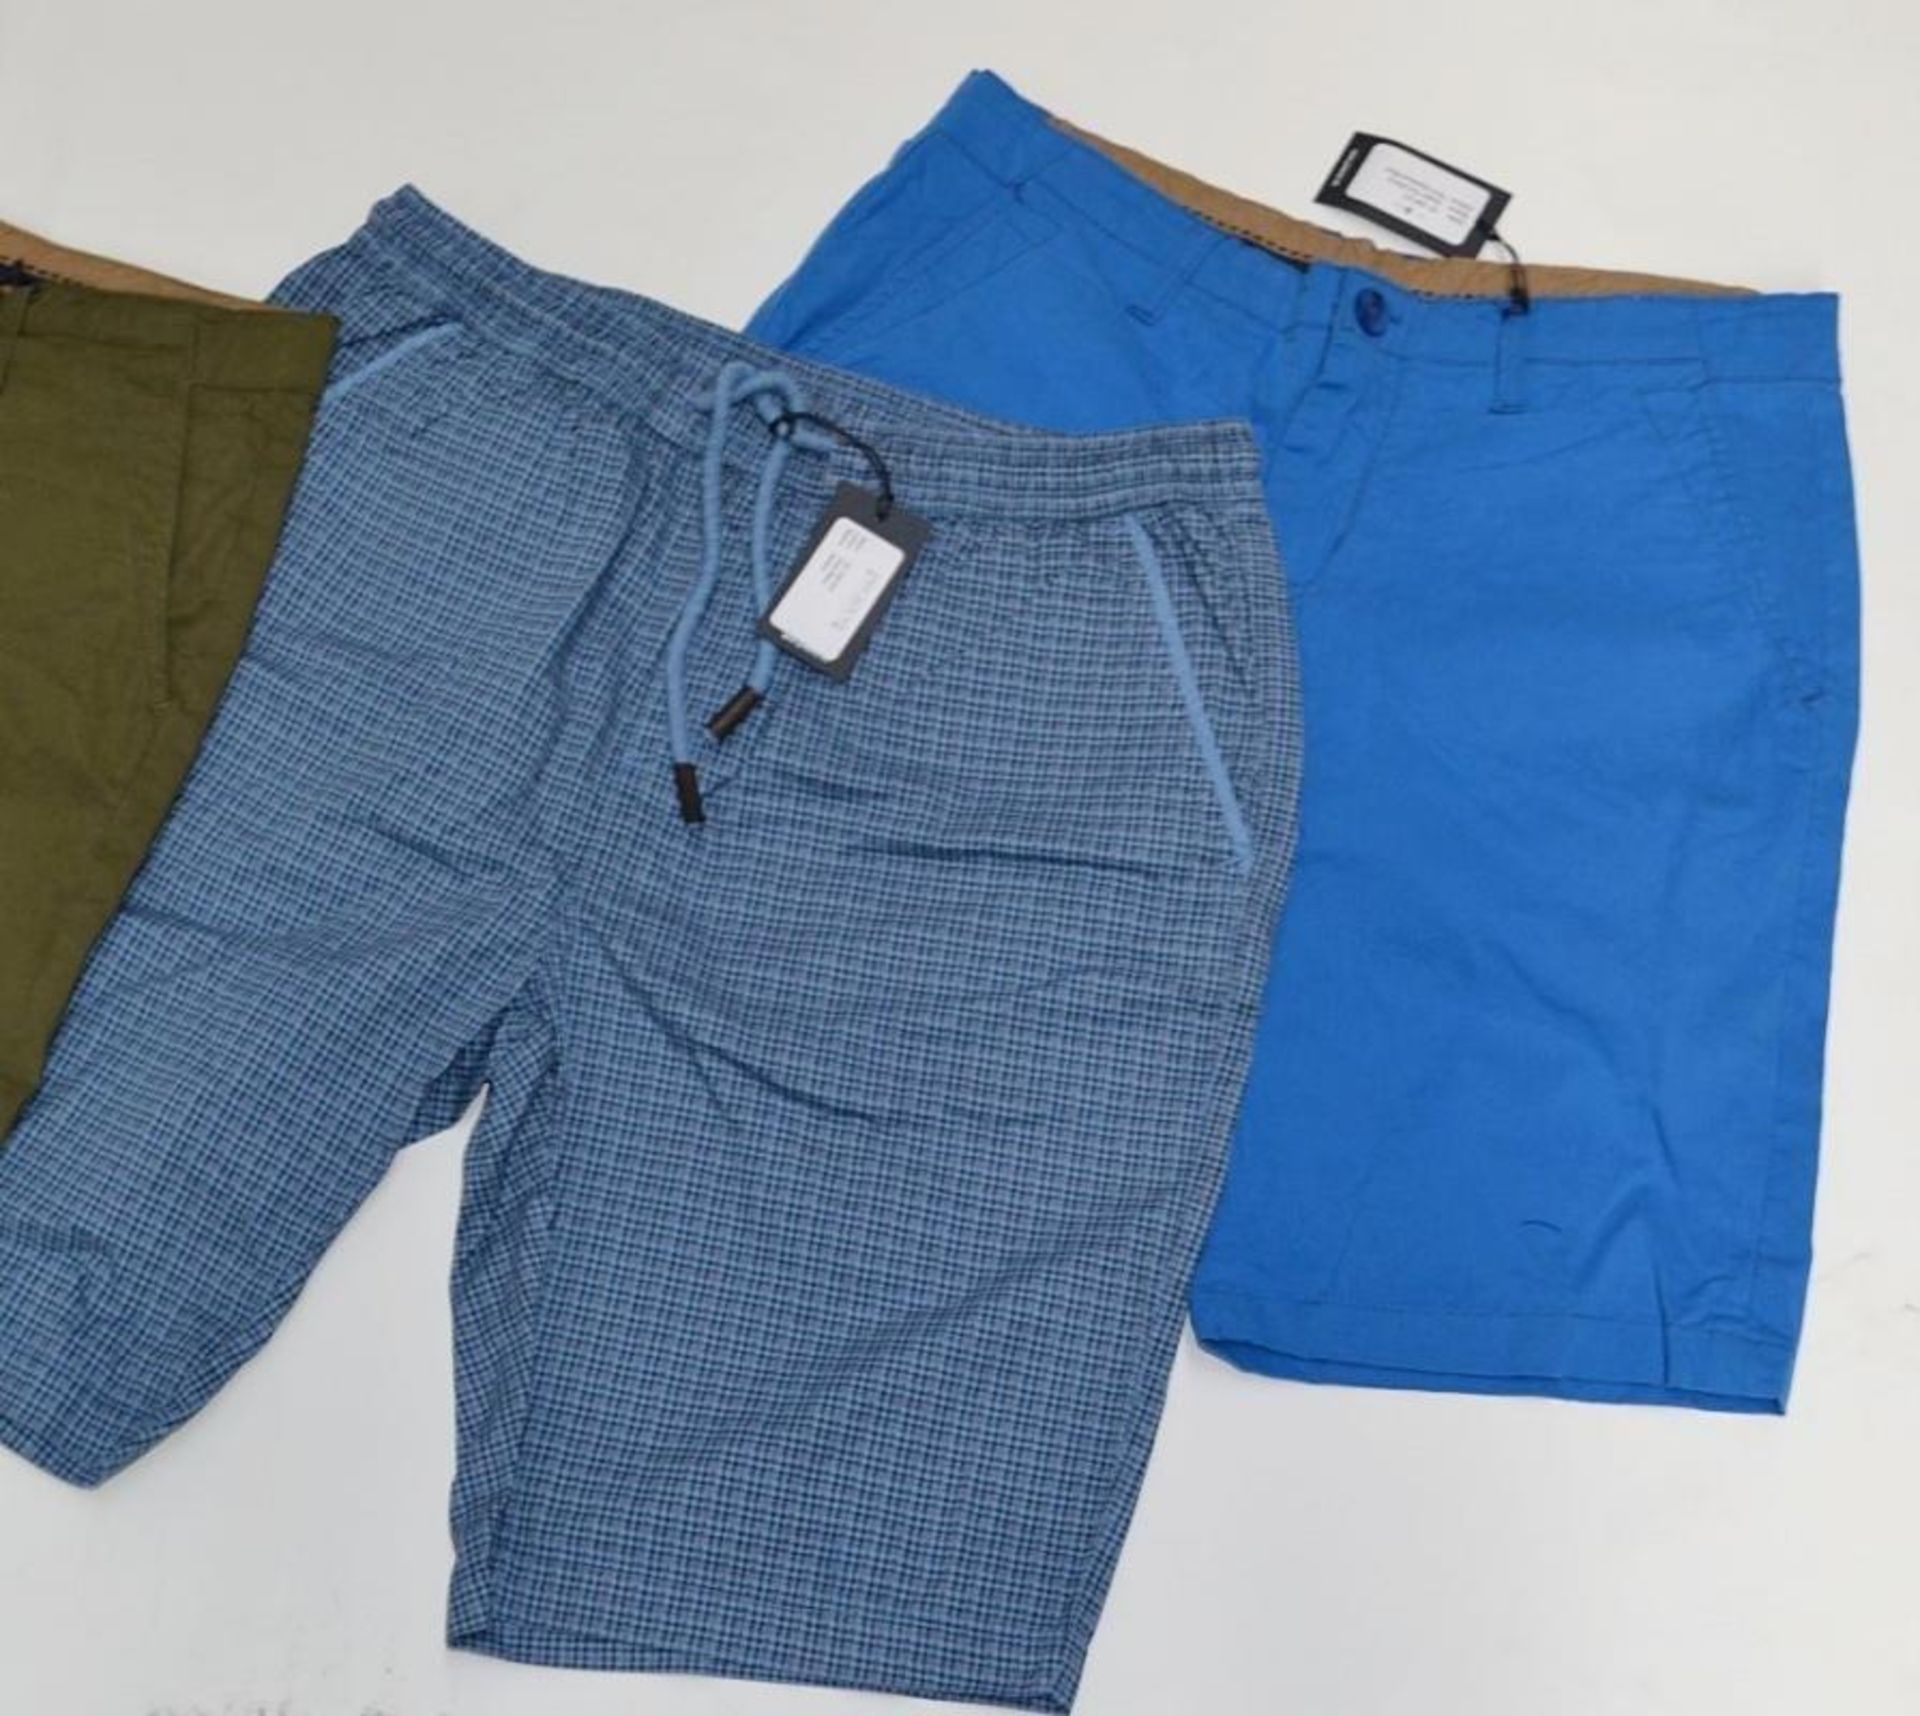 4 x Assorted Pairs Of PRE END Branded Mens Cotton Shorts - New Stock With Tags - Recent Retail Closu - Image 3 of 3